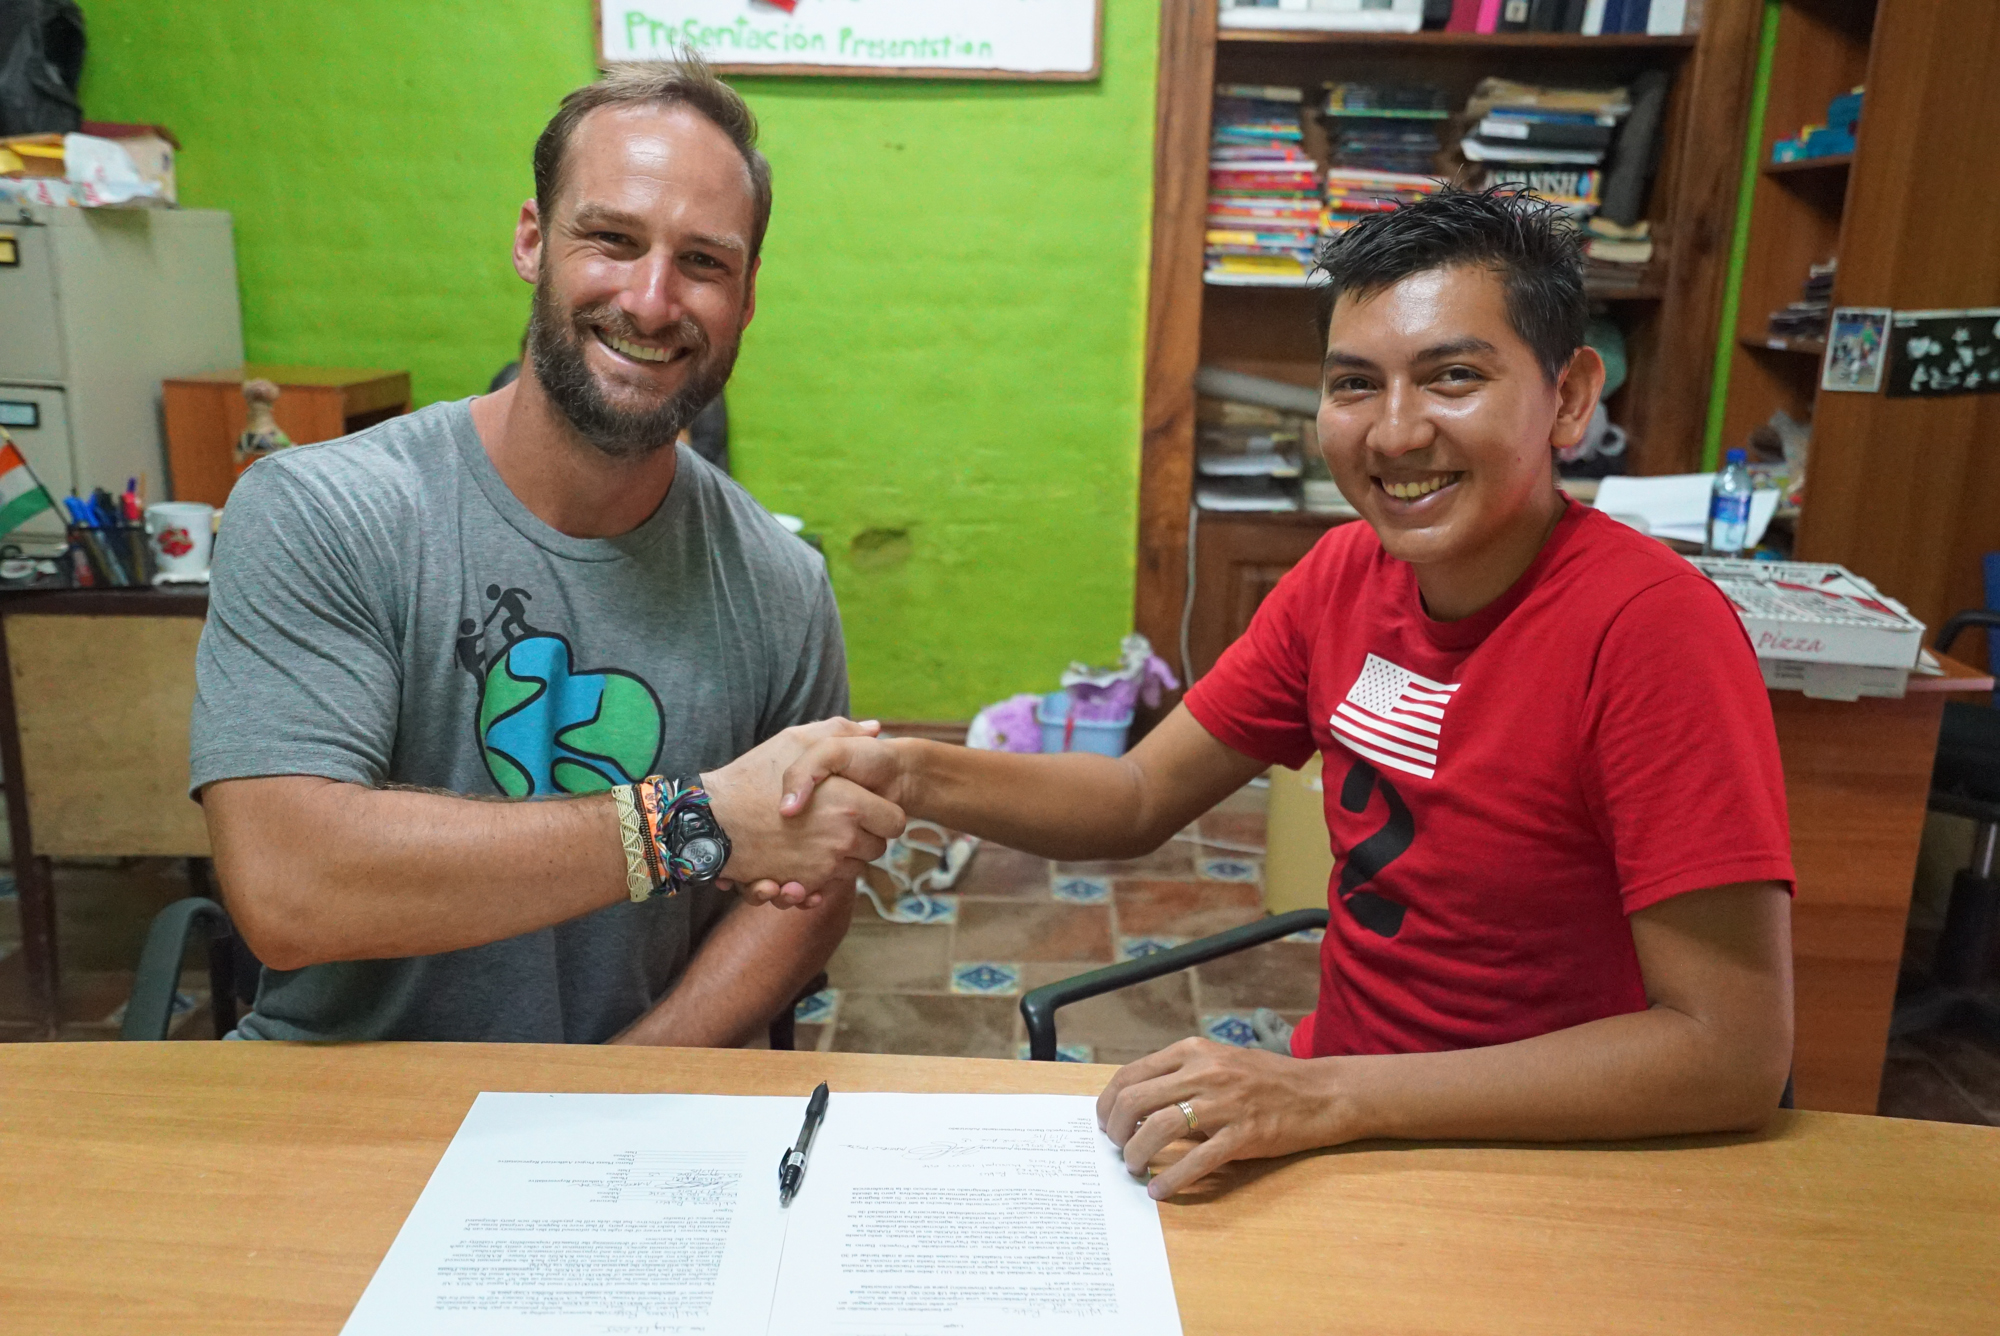  This is William, RAKlife's first micro-lending recipient!&nbsp;William received a $600 loan to be repaid over the next 12 months to give him an opportunity to establish his business- A small shop selling specialty beauty care products to the local r